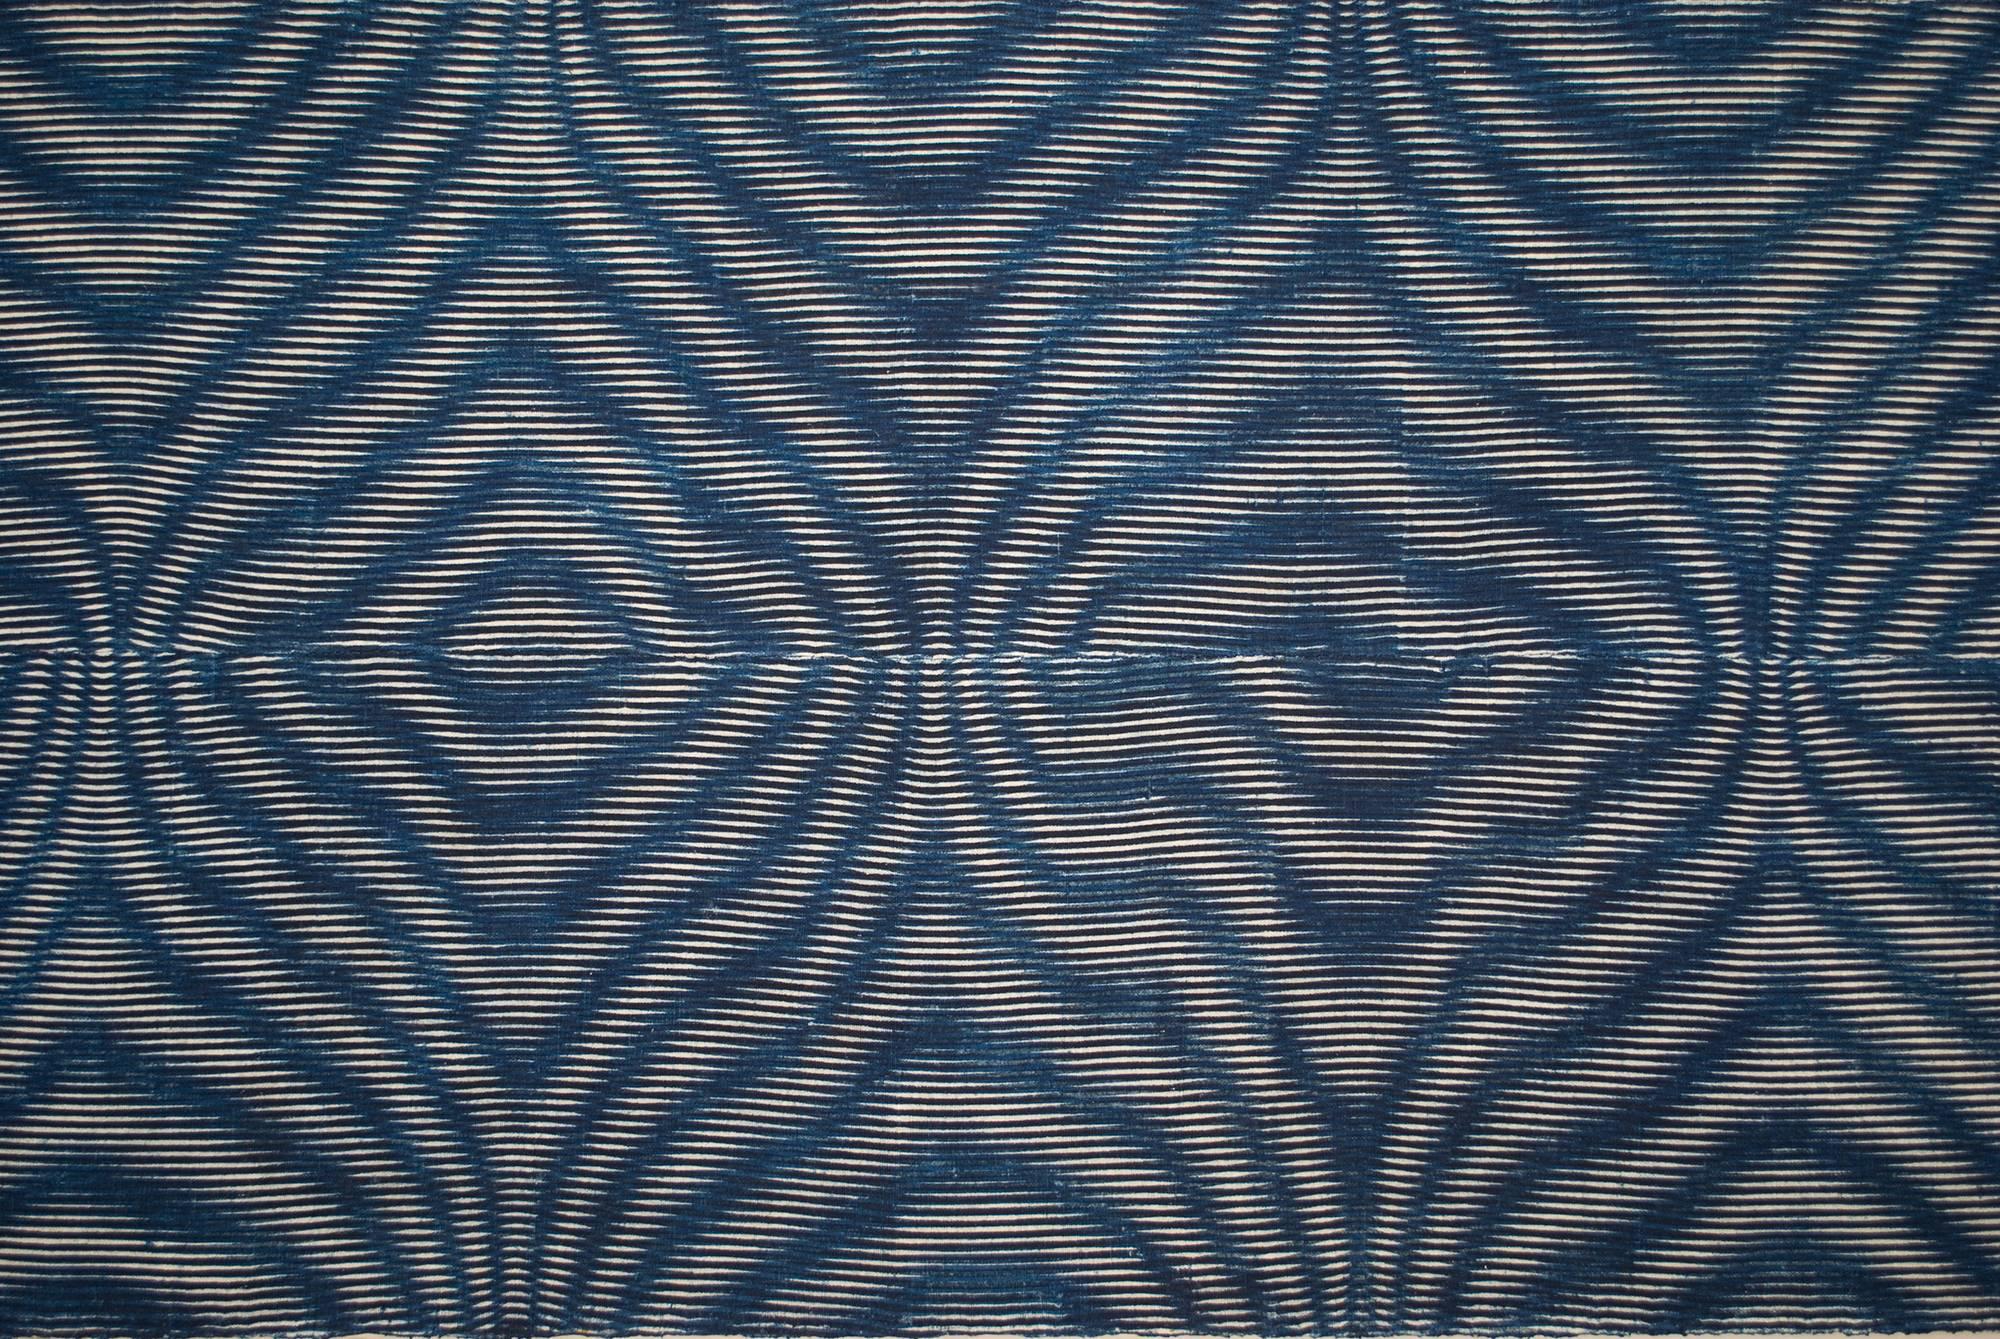 Offered by John Ruddy
Late 19th century stencil-dyed futon cover, Japan

Known as Kumano-zome, this cotton futon cover was dyed with natural indigo. The pattern is composed of very simple indigo and white stripes, stencil dyed, then overlaid with